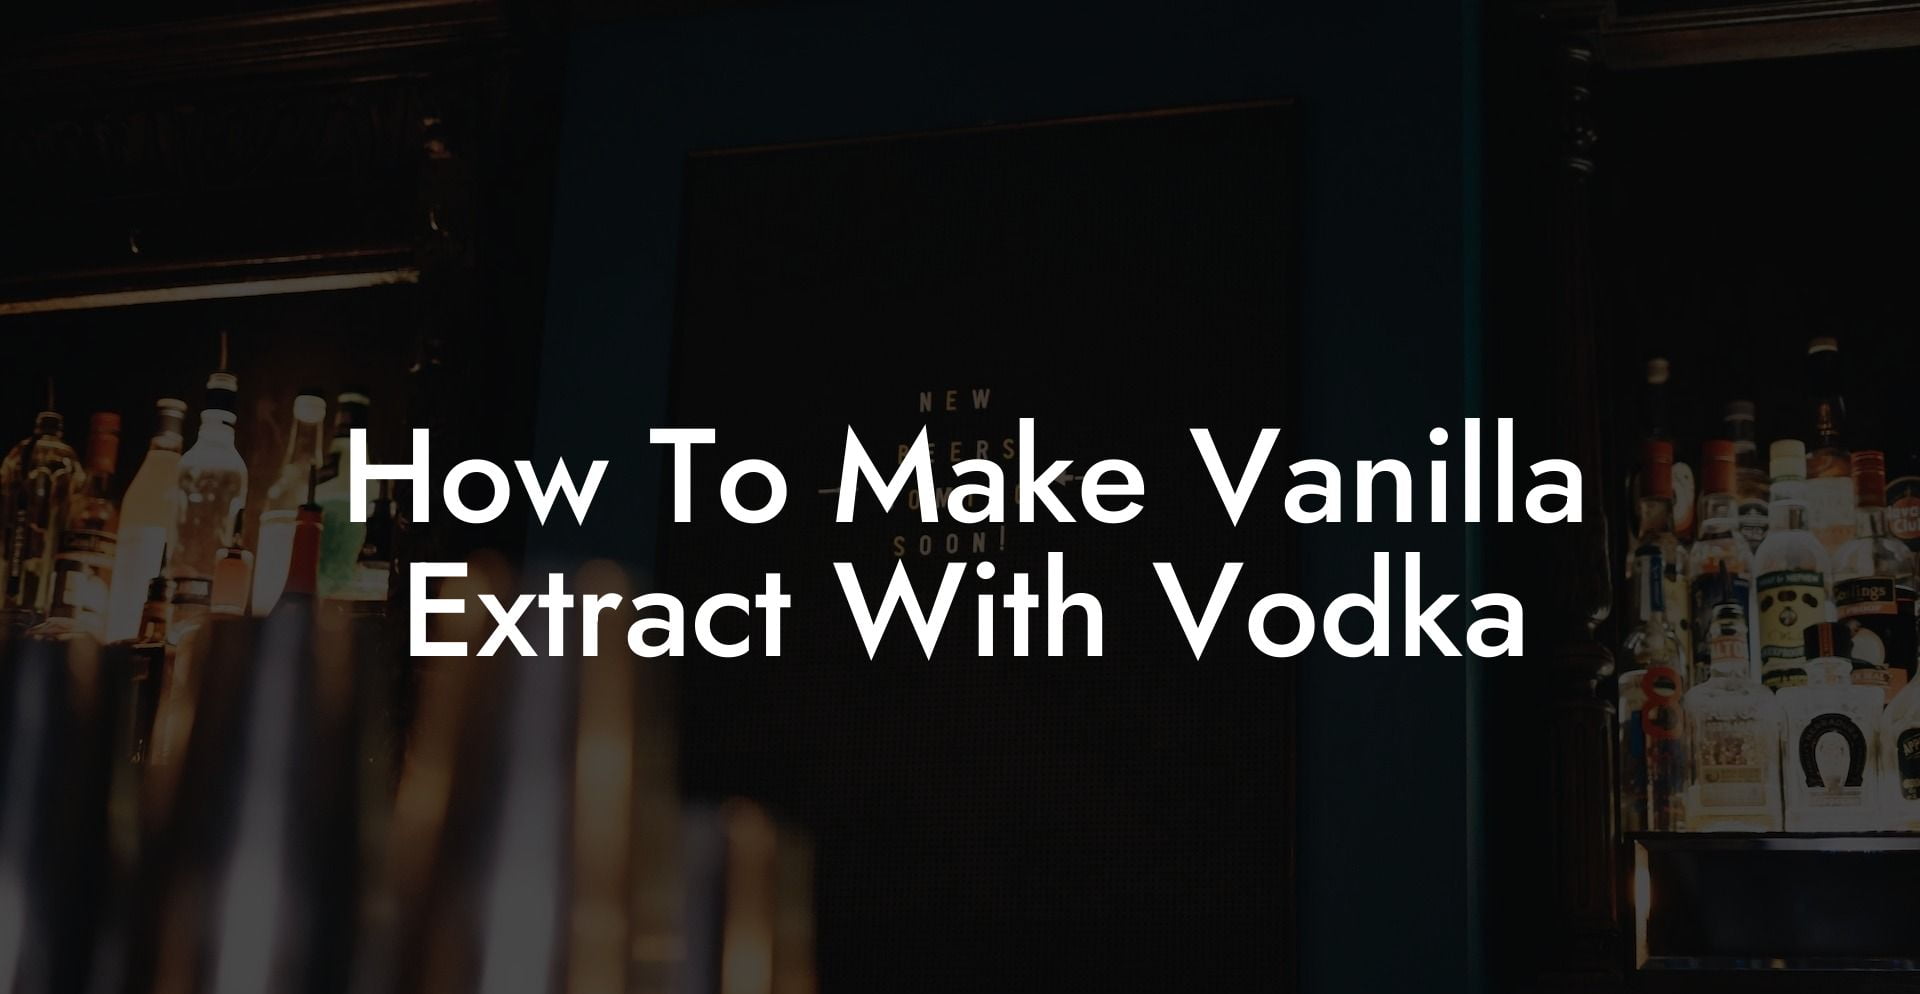 How To Make Vanilla Extract With Vodka